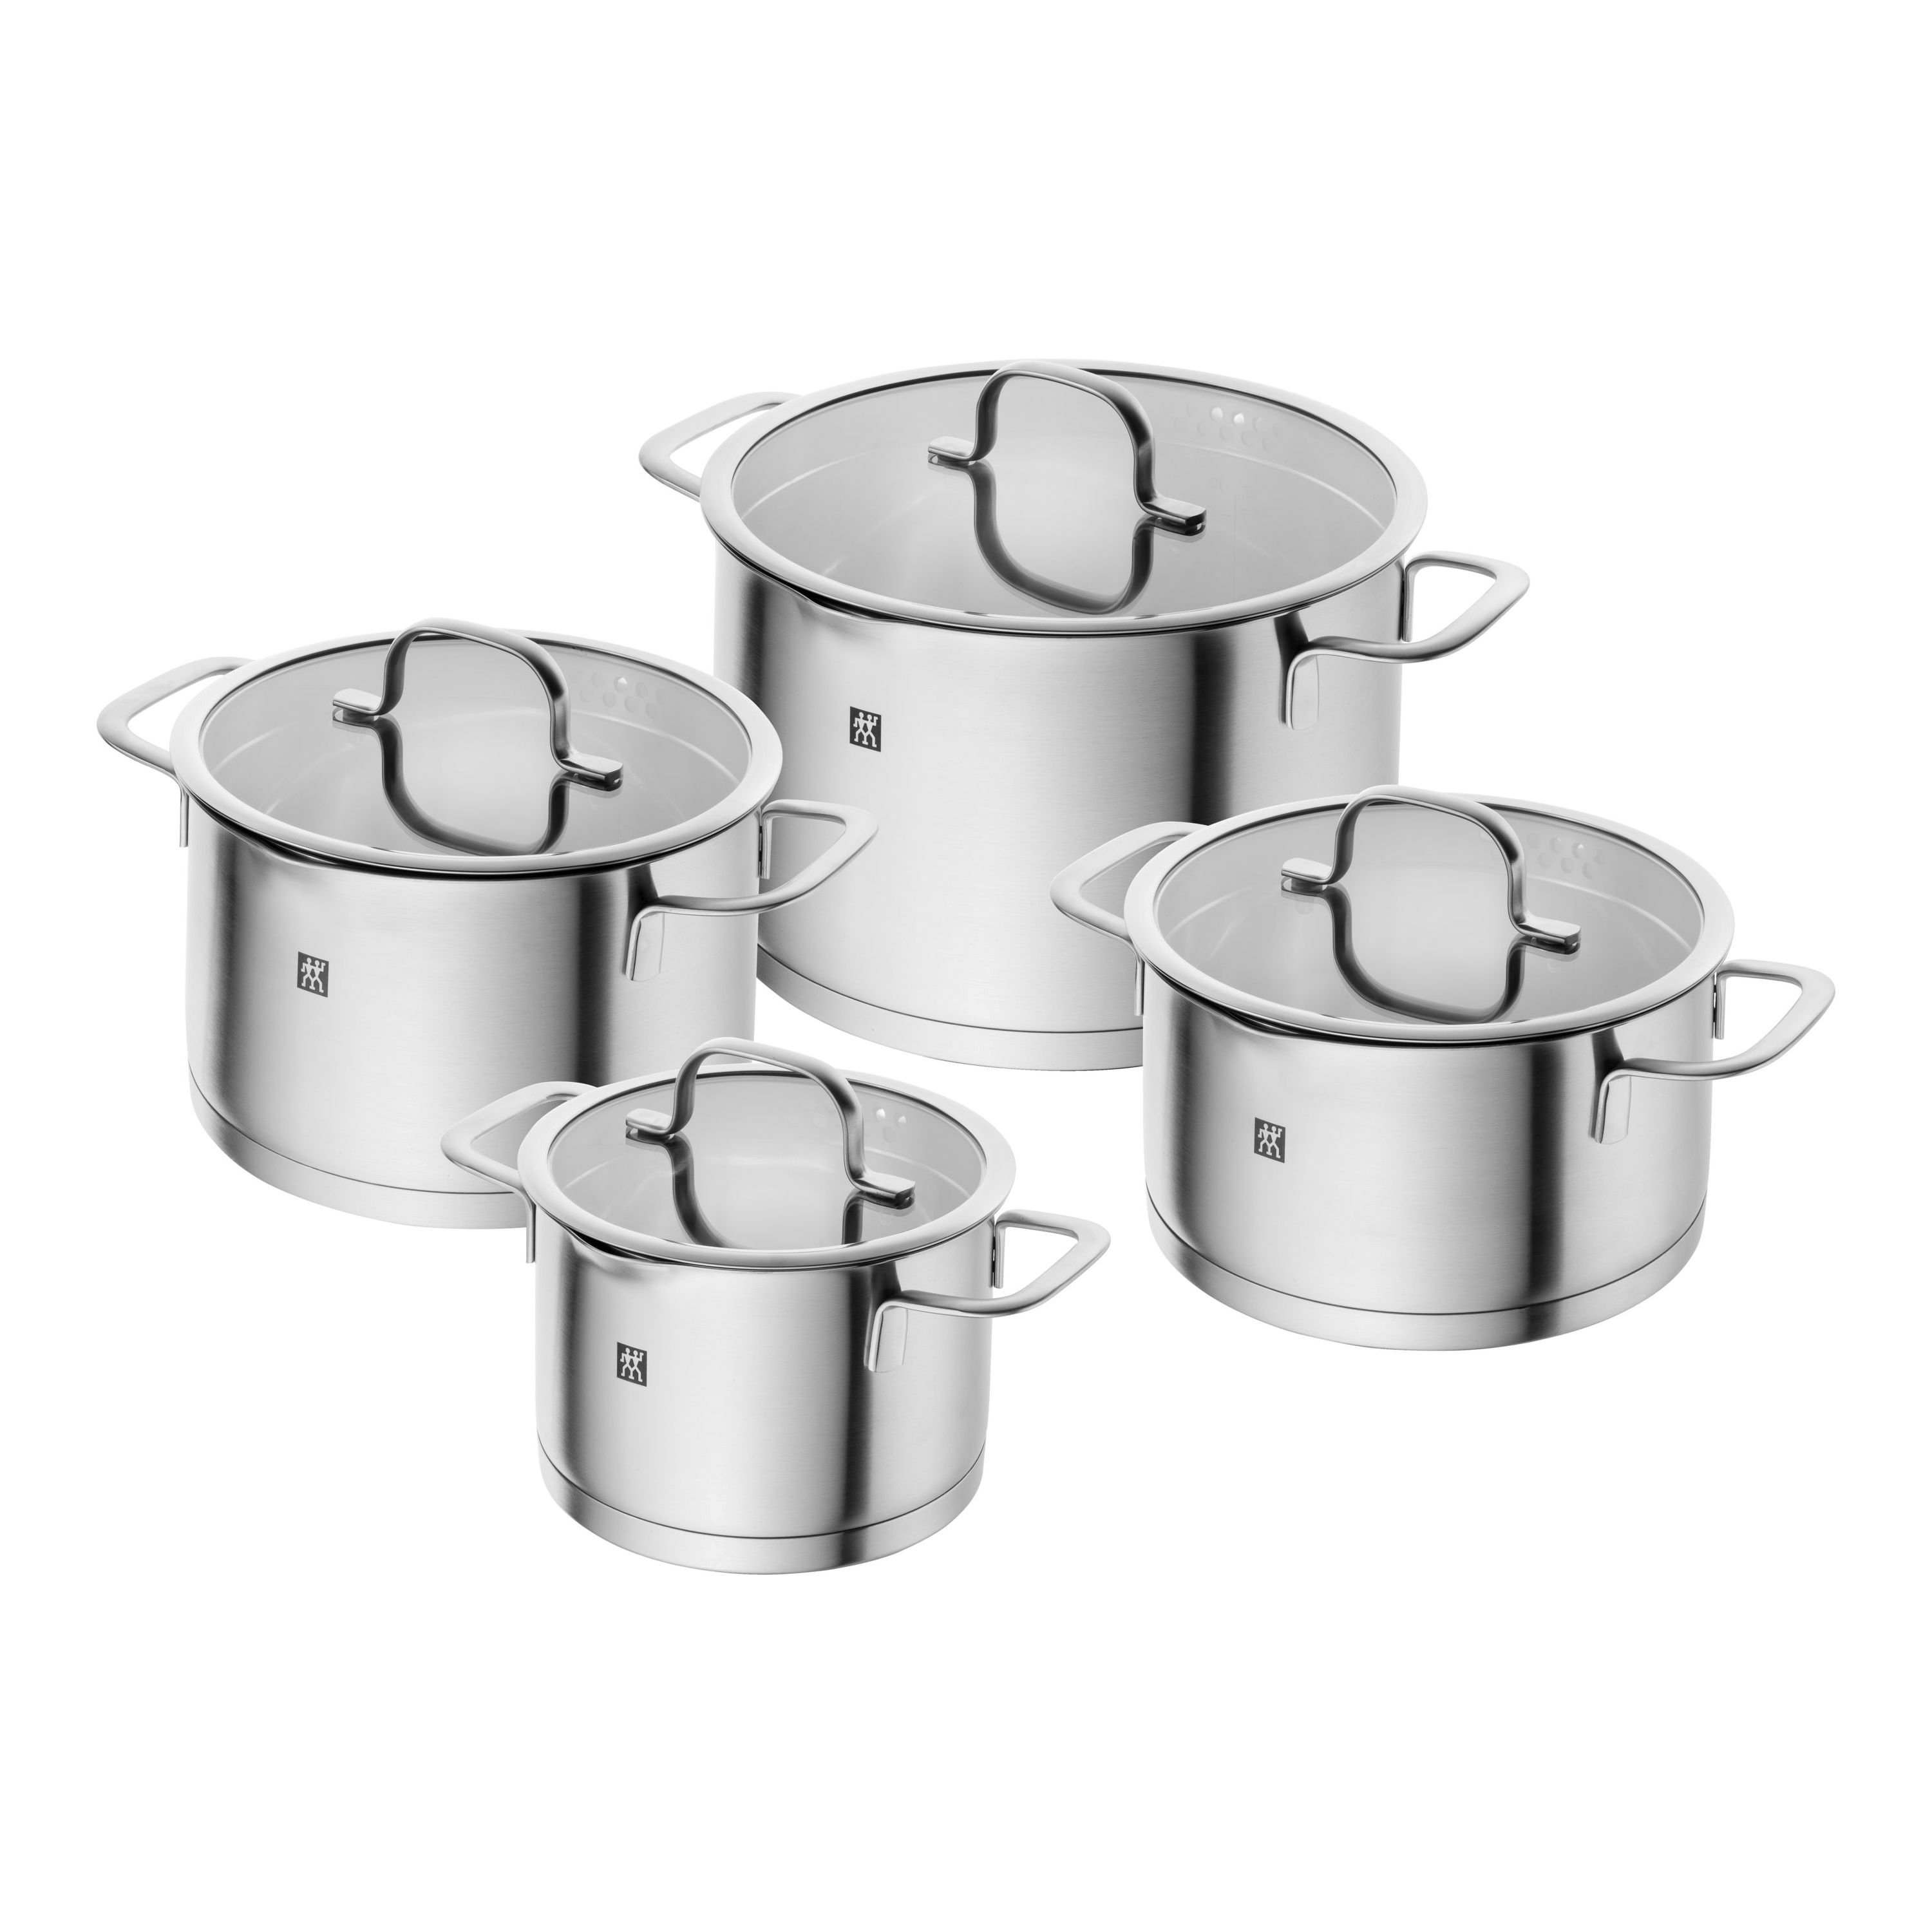 ZWILLING Base Cookware Set Silver Stainless Steel 4-Piece